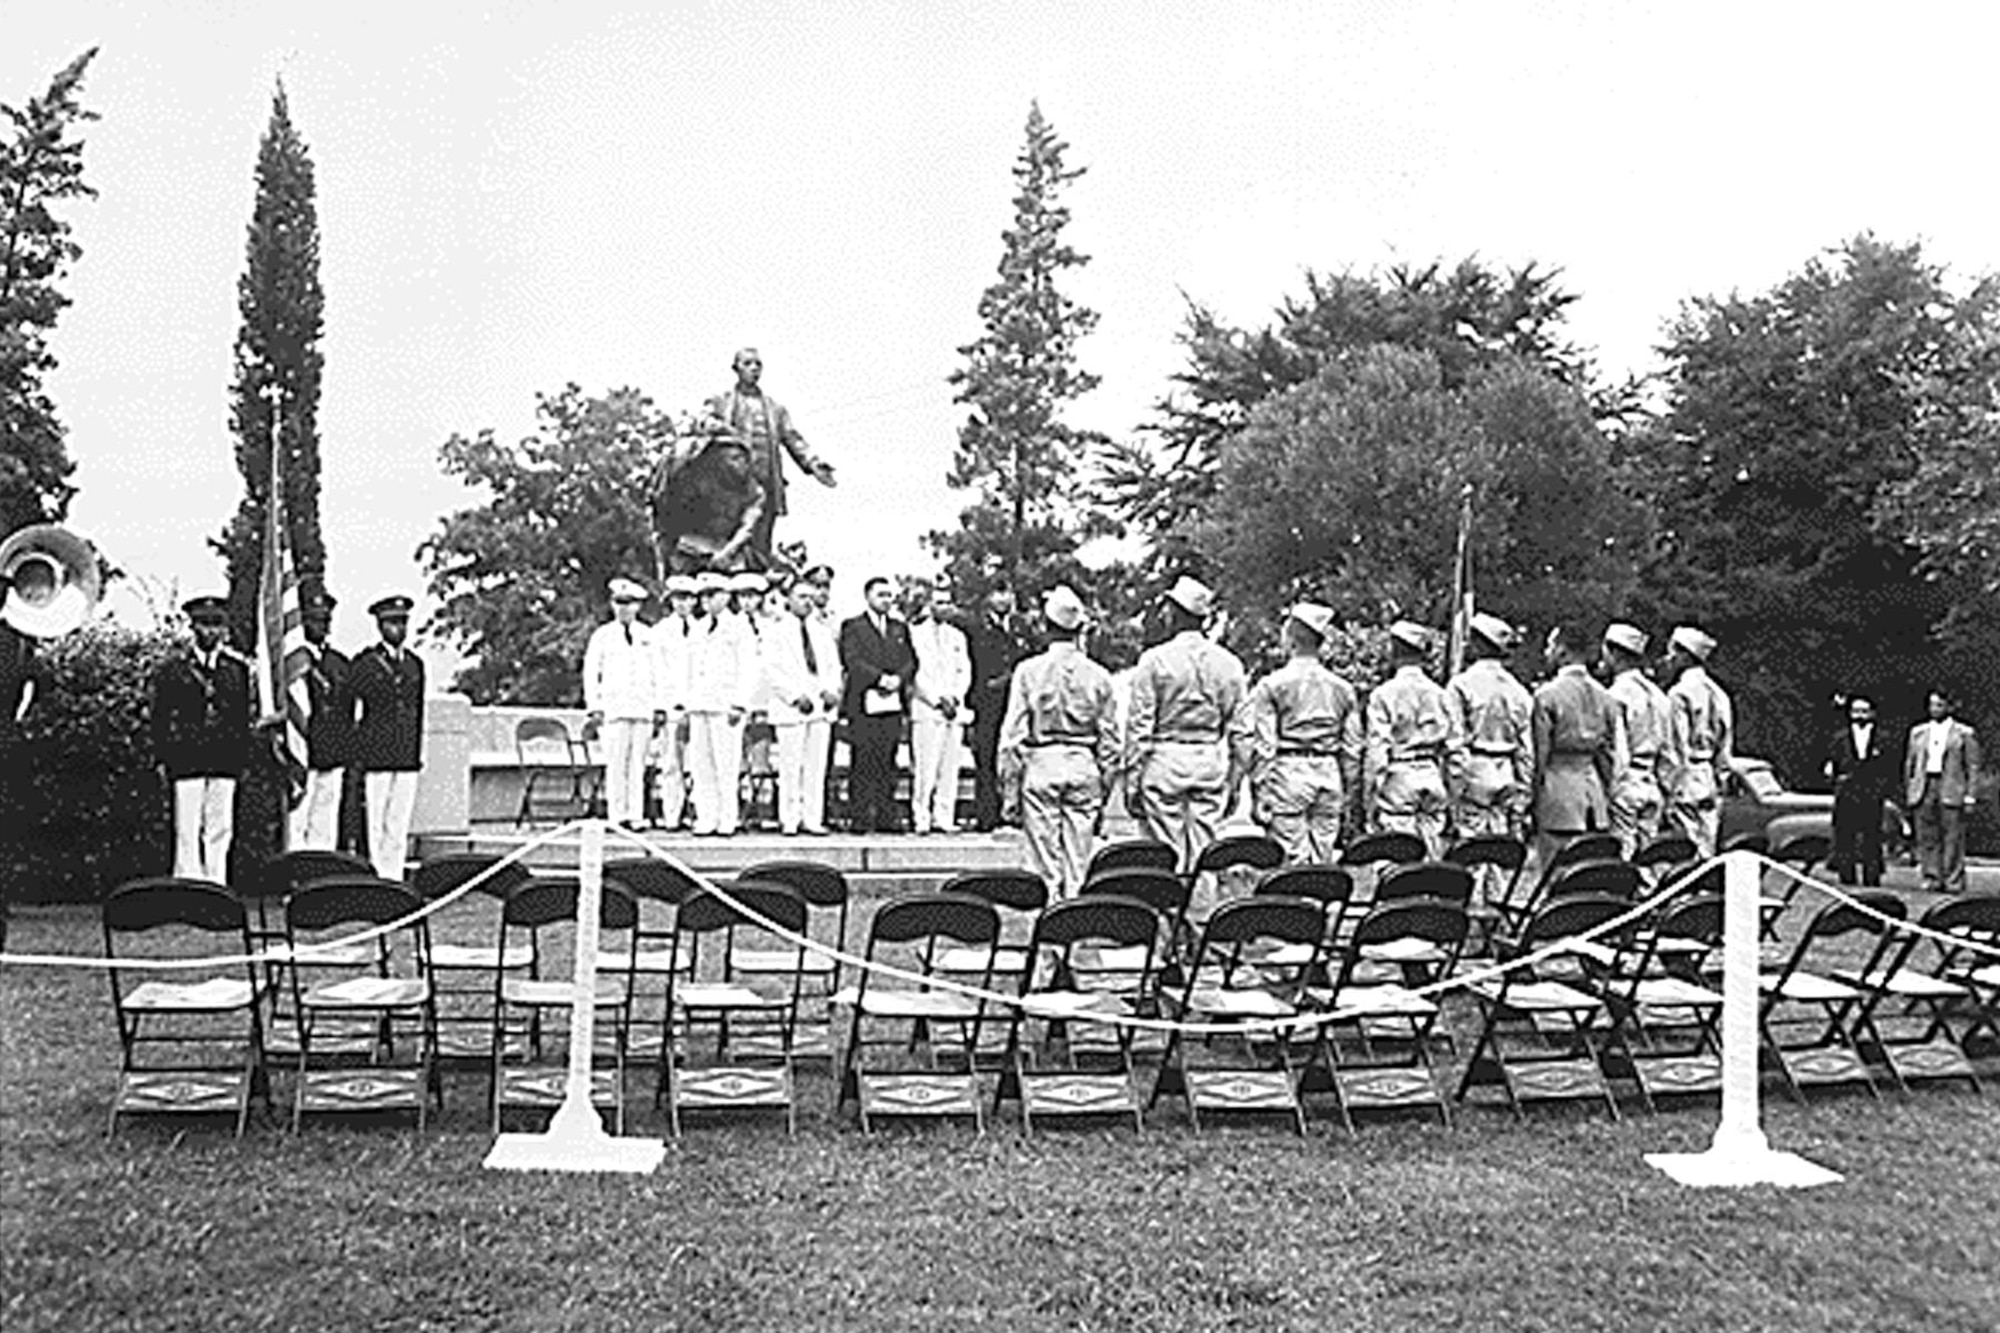 Cadets are welcomed to Army Air Corps training in front of the Booker T. Washington monument at Tuskegee Institute, August 1941. (U.S. Air Force photo)